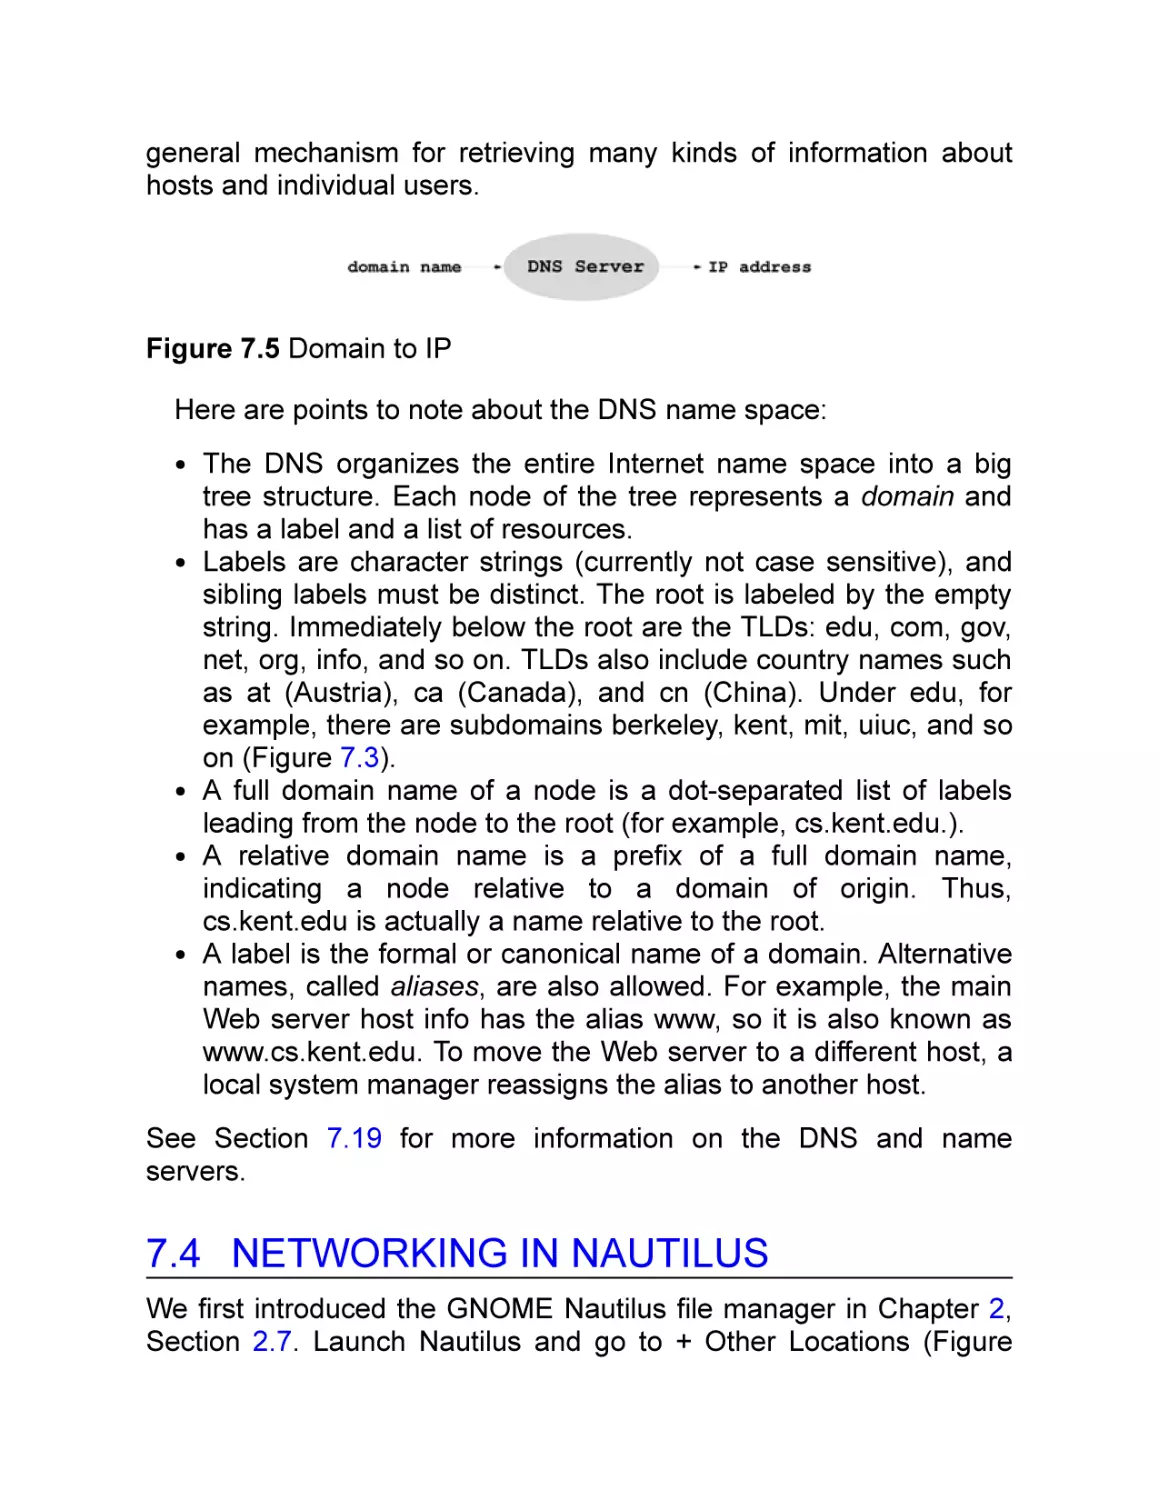 7.4 Networking in Nautilus